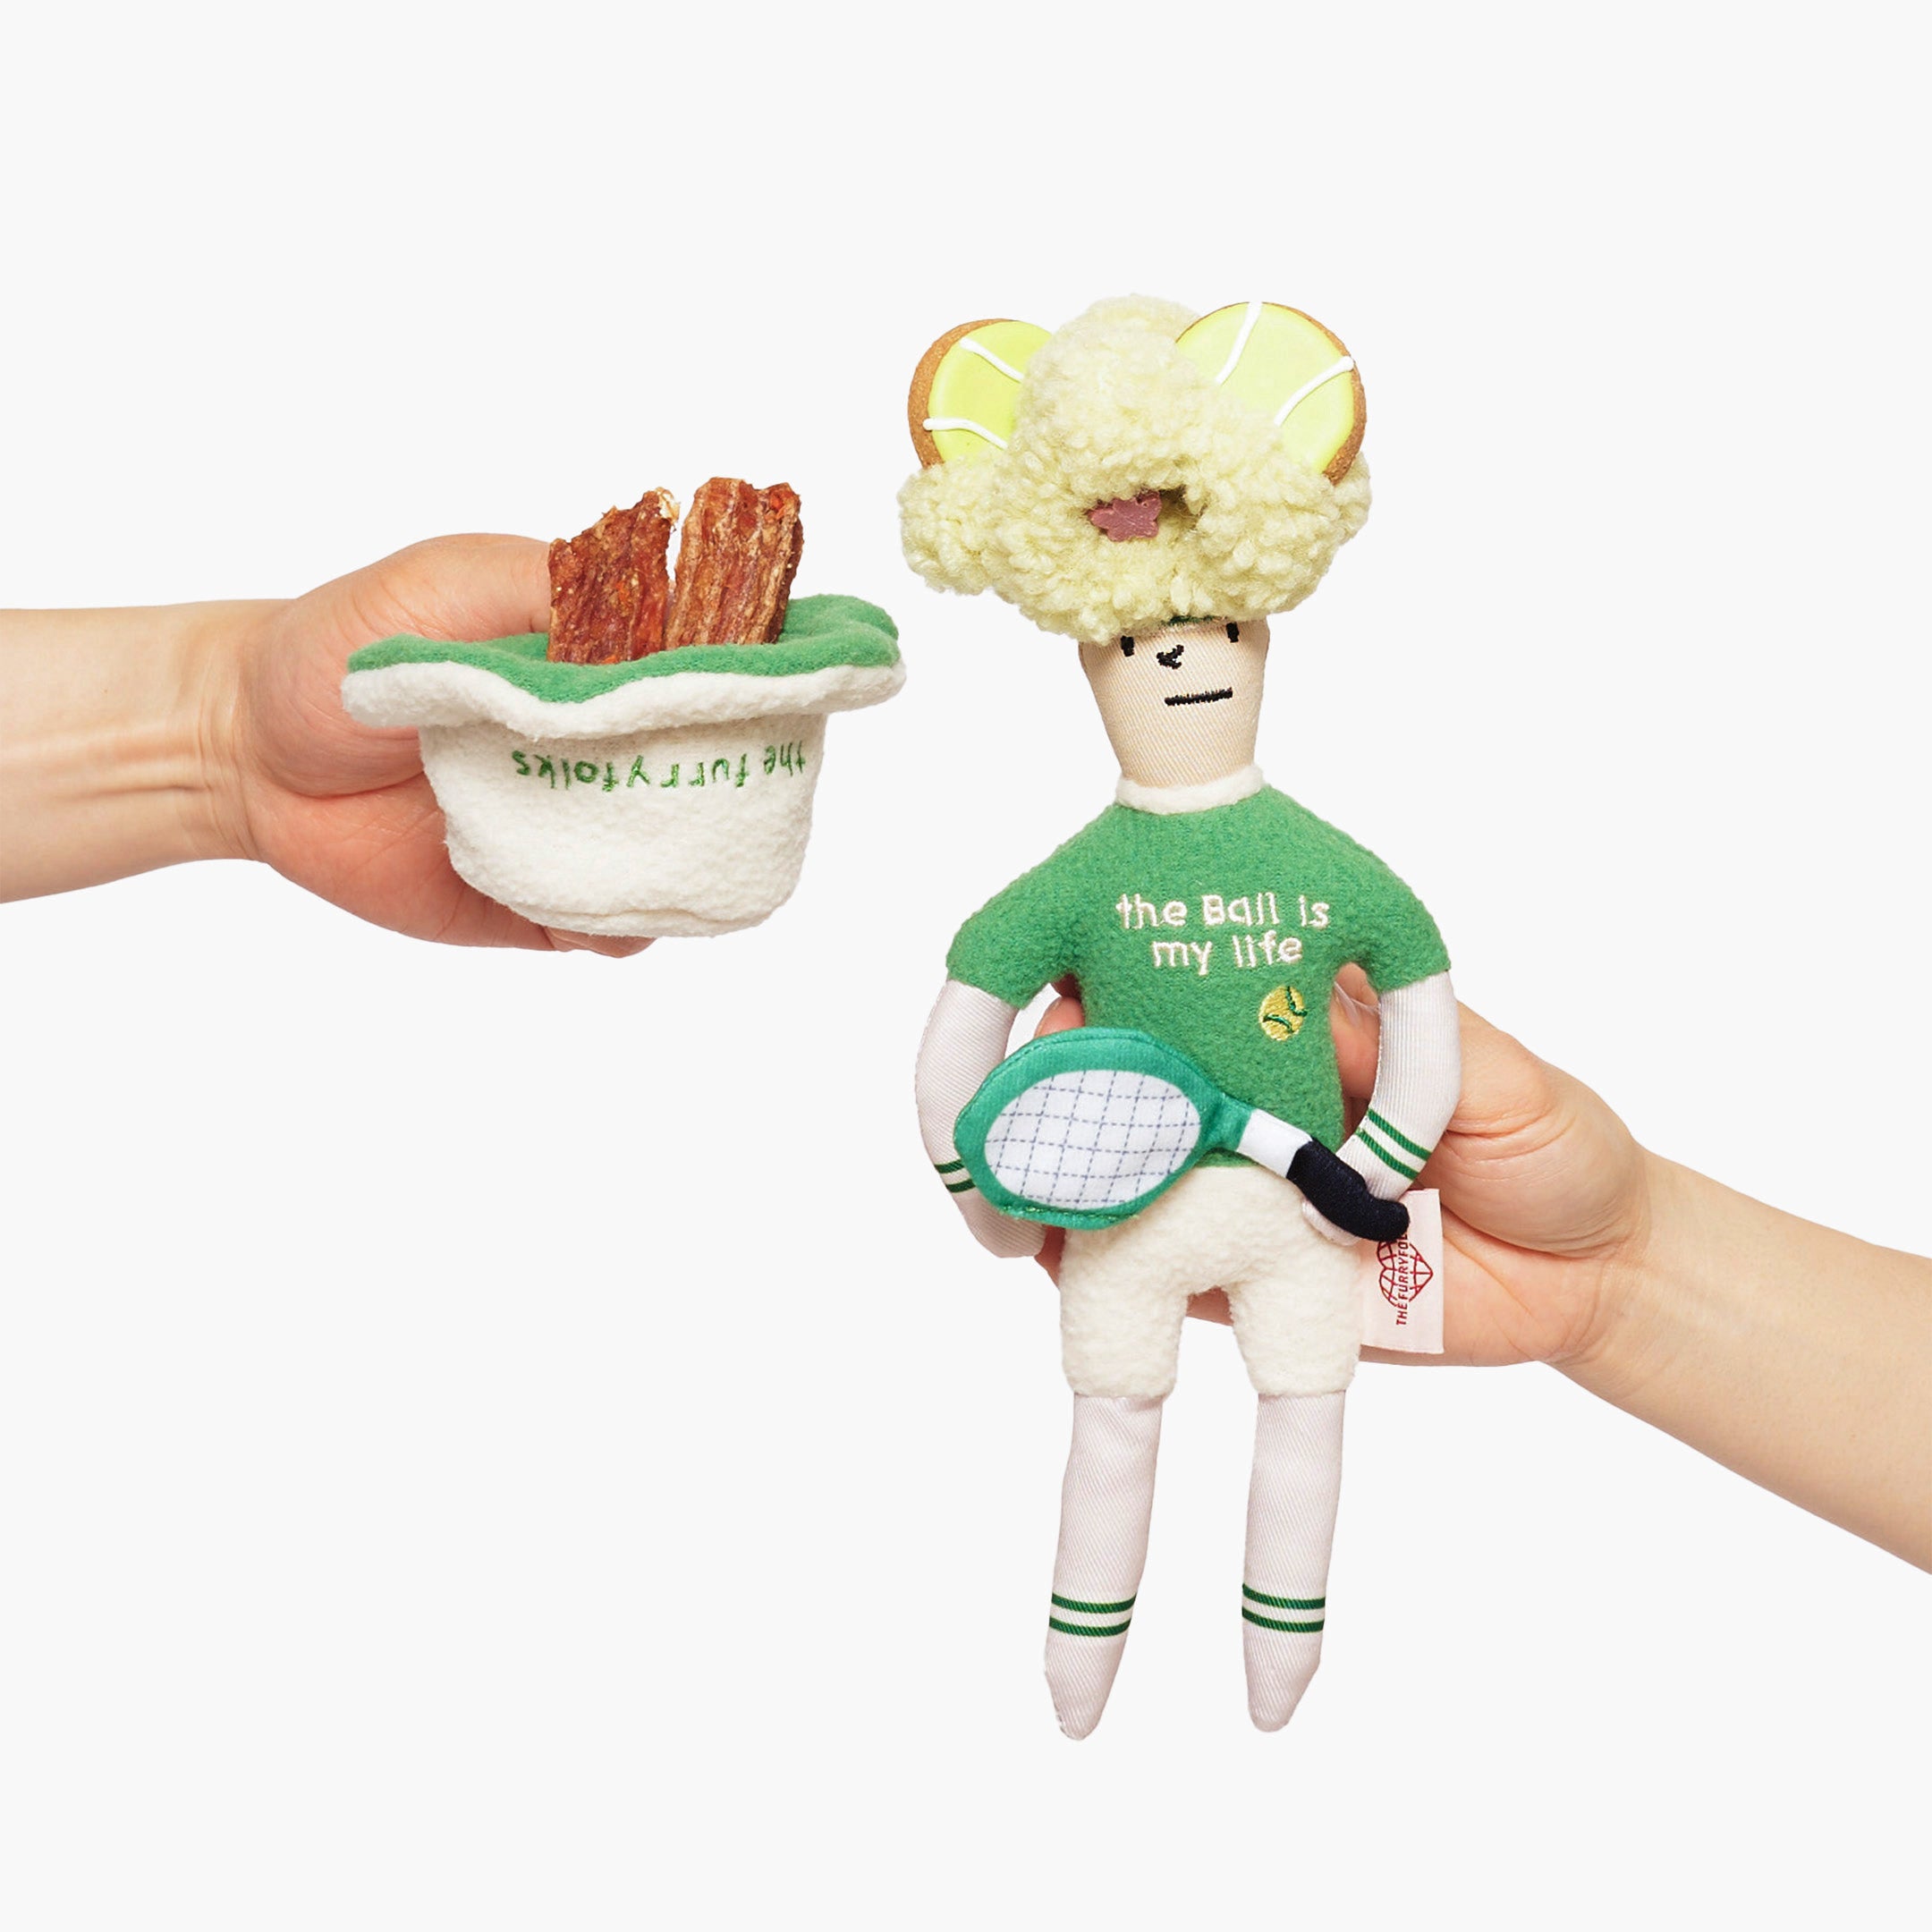 The image features two hands holding plush toys. On the left, a hand holds a small, plush cap filled with treats. On the right, another hand has the same plush toy as before, designed to resemble a human-like figure dressed as a tennis player, with a whimsical green hat, green sweater with the phrase "the ball is my life," and a white tennis racket. The figure's hat has added yellow "tennis ball" treats. The design is playful and imaginative.